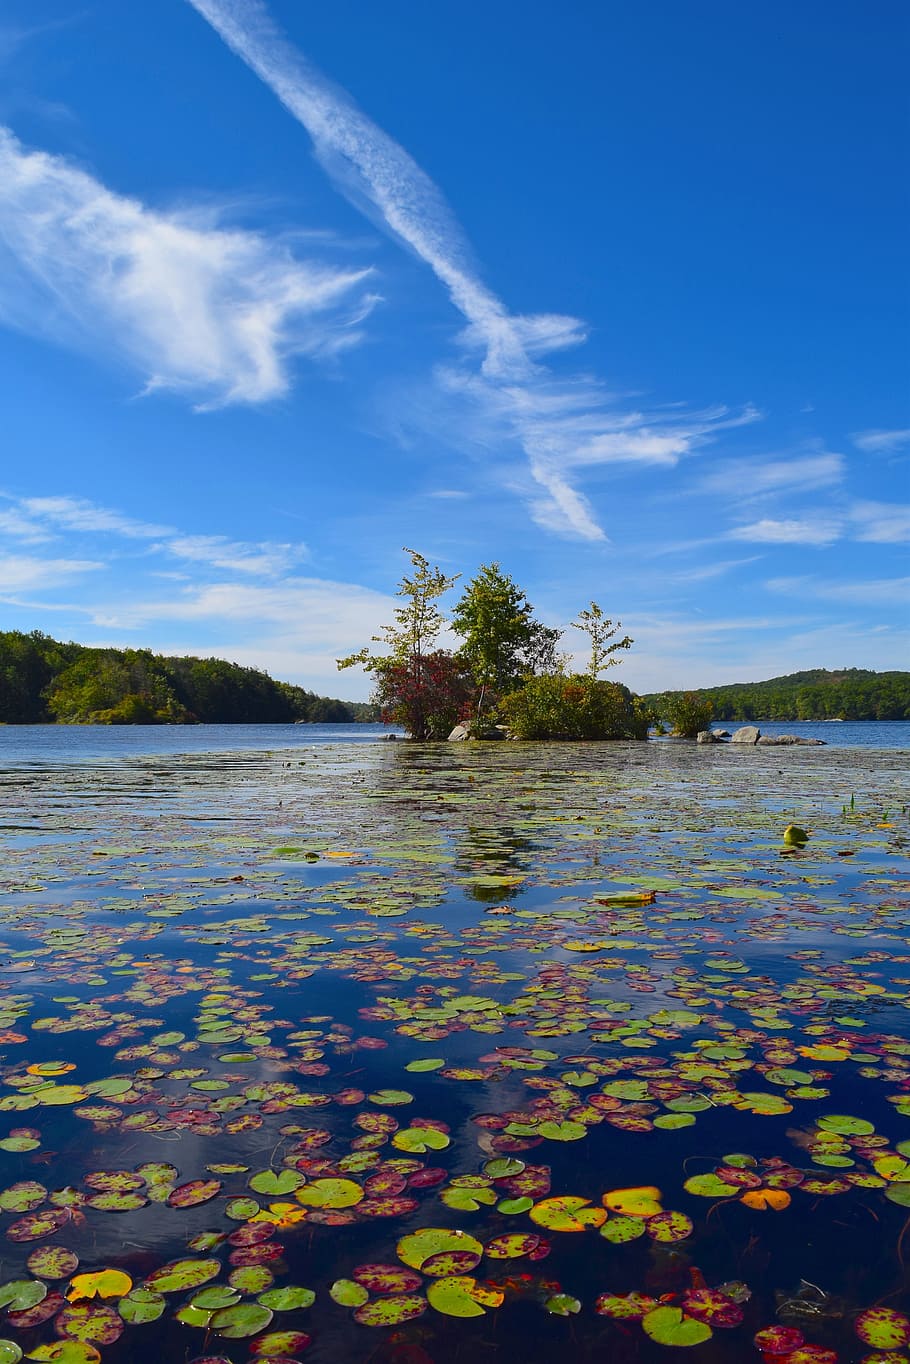 lake, island, water, landscape, lily pads, trees, sky, blue